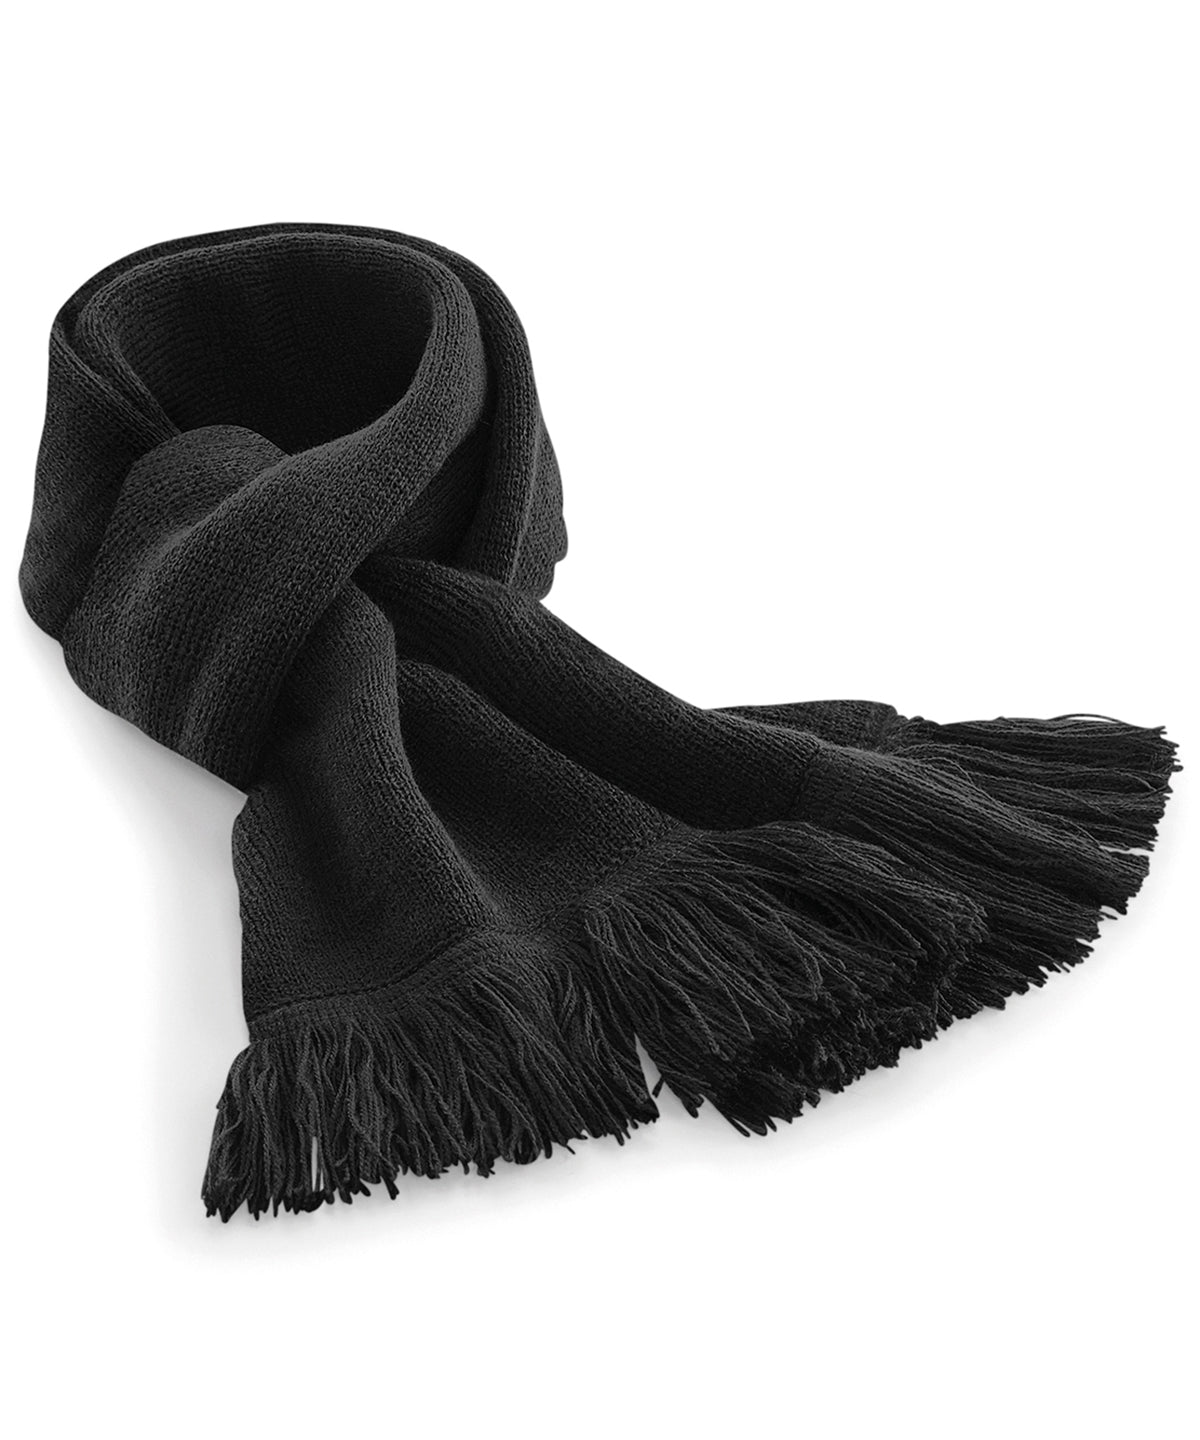 Personalised Scarves - Black Beechfield Classic knitted scarf